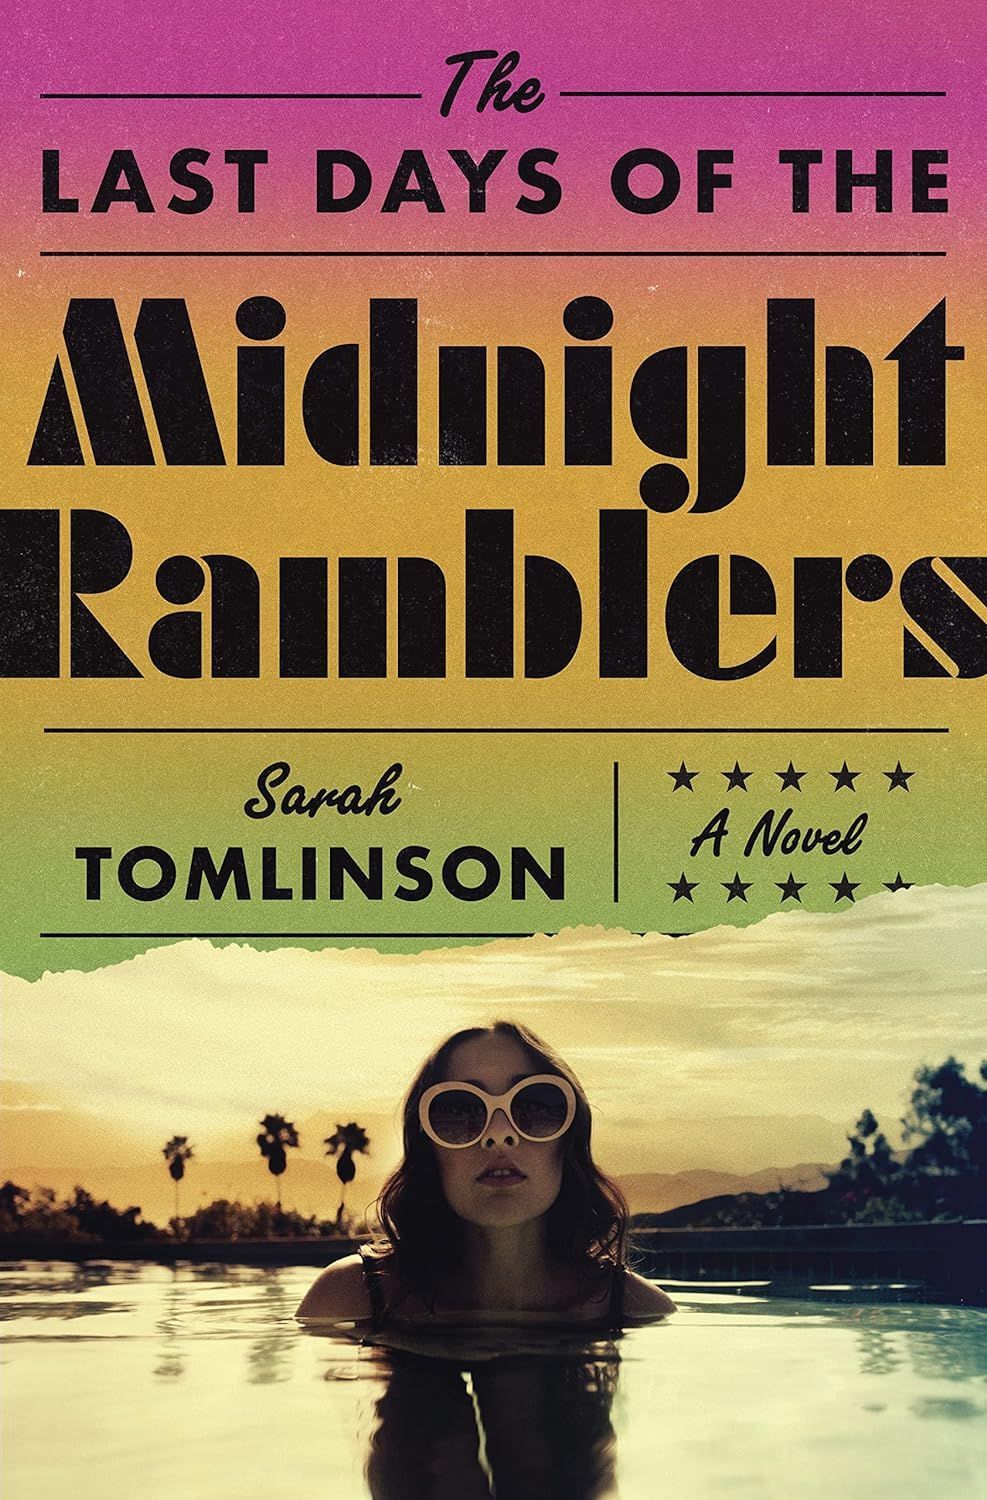 A Groupie’s Ghostwriter: On Sarah Tomlinson’s “The Last Days of the Midnight Ramblers”